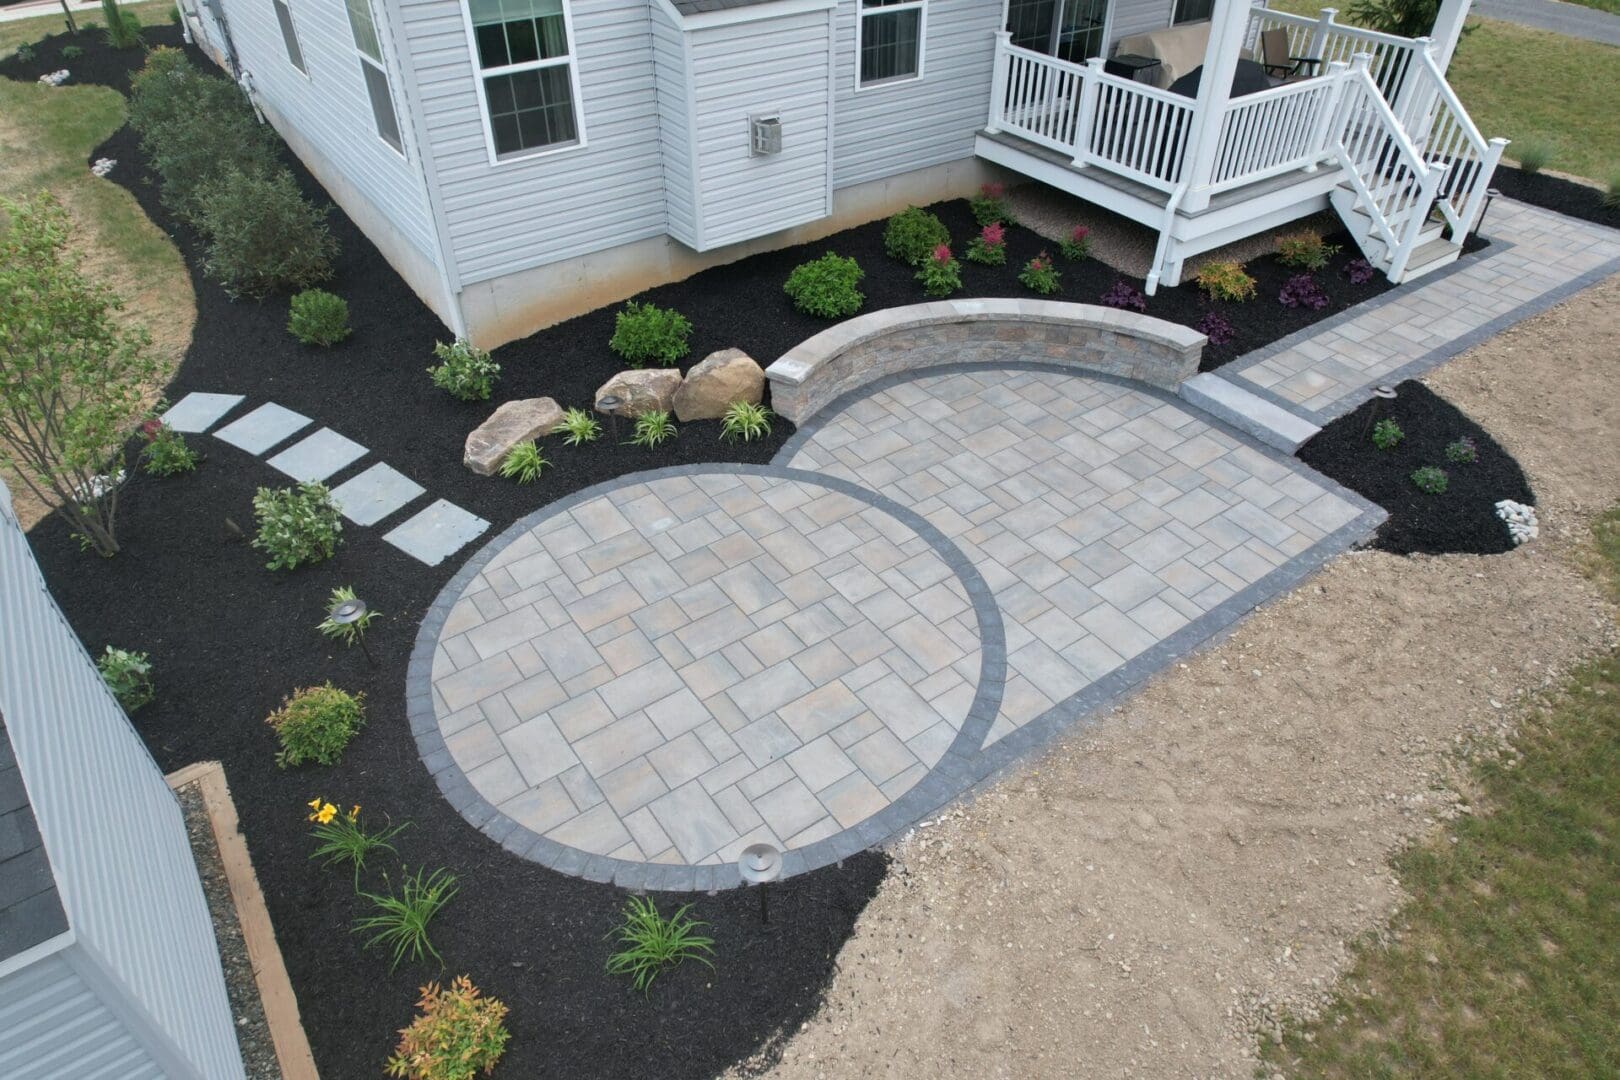 An aerial view of a backyard showcasing a beautifully designed circular patio, highlighting the impeccable hardscape design.